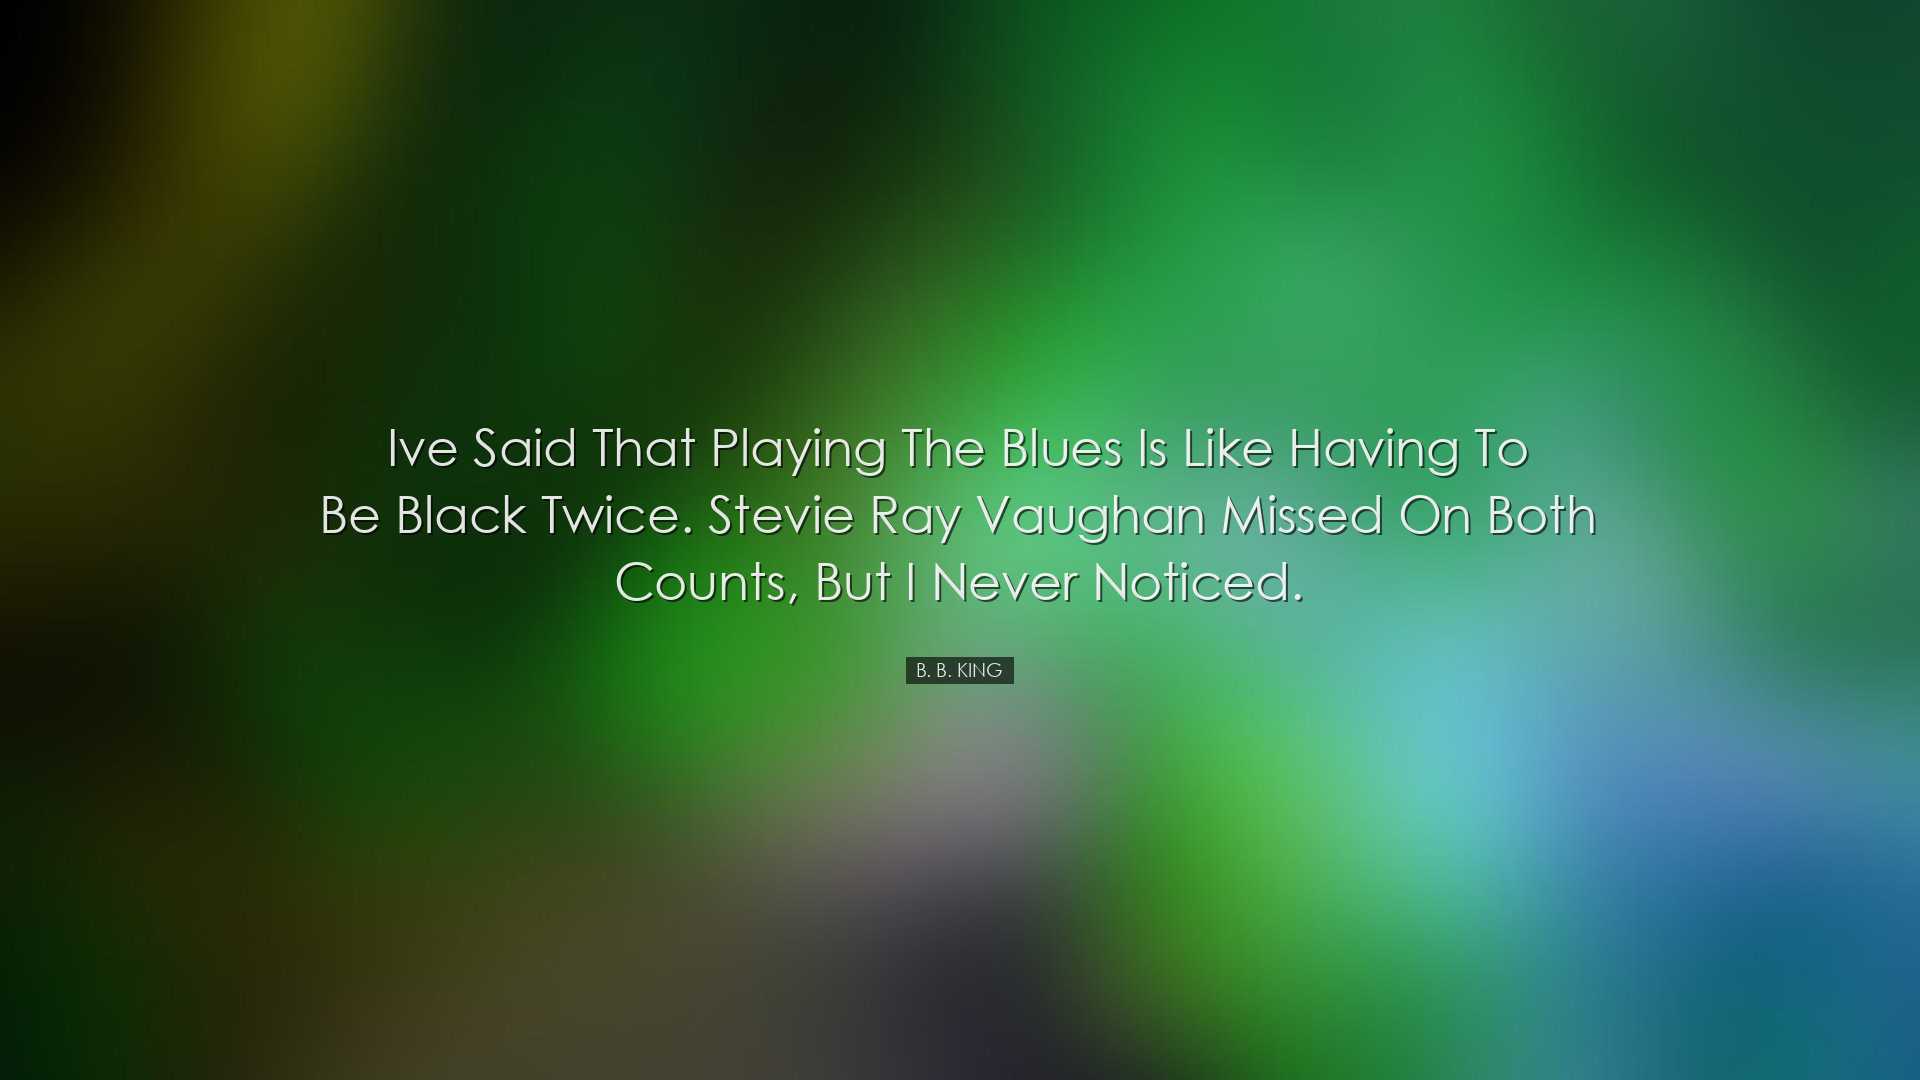 Ive said that playing the blues is like having to be black twice.